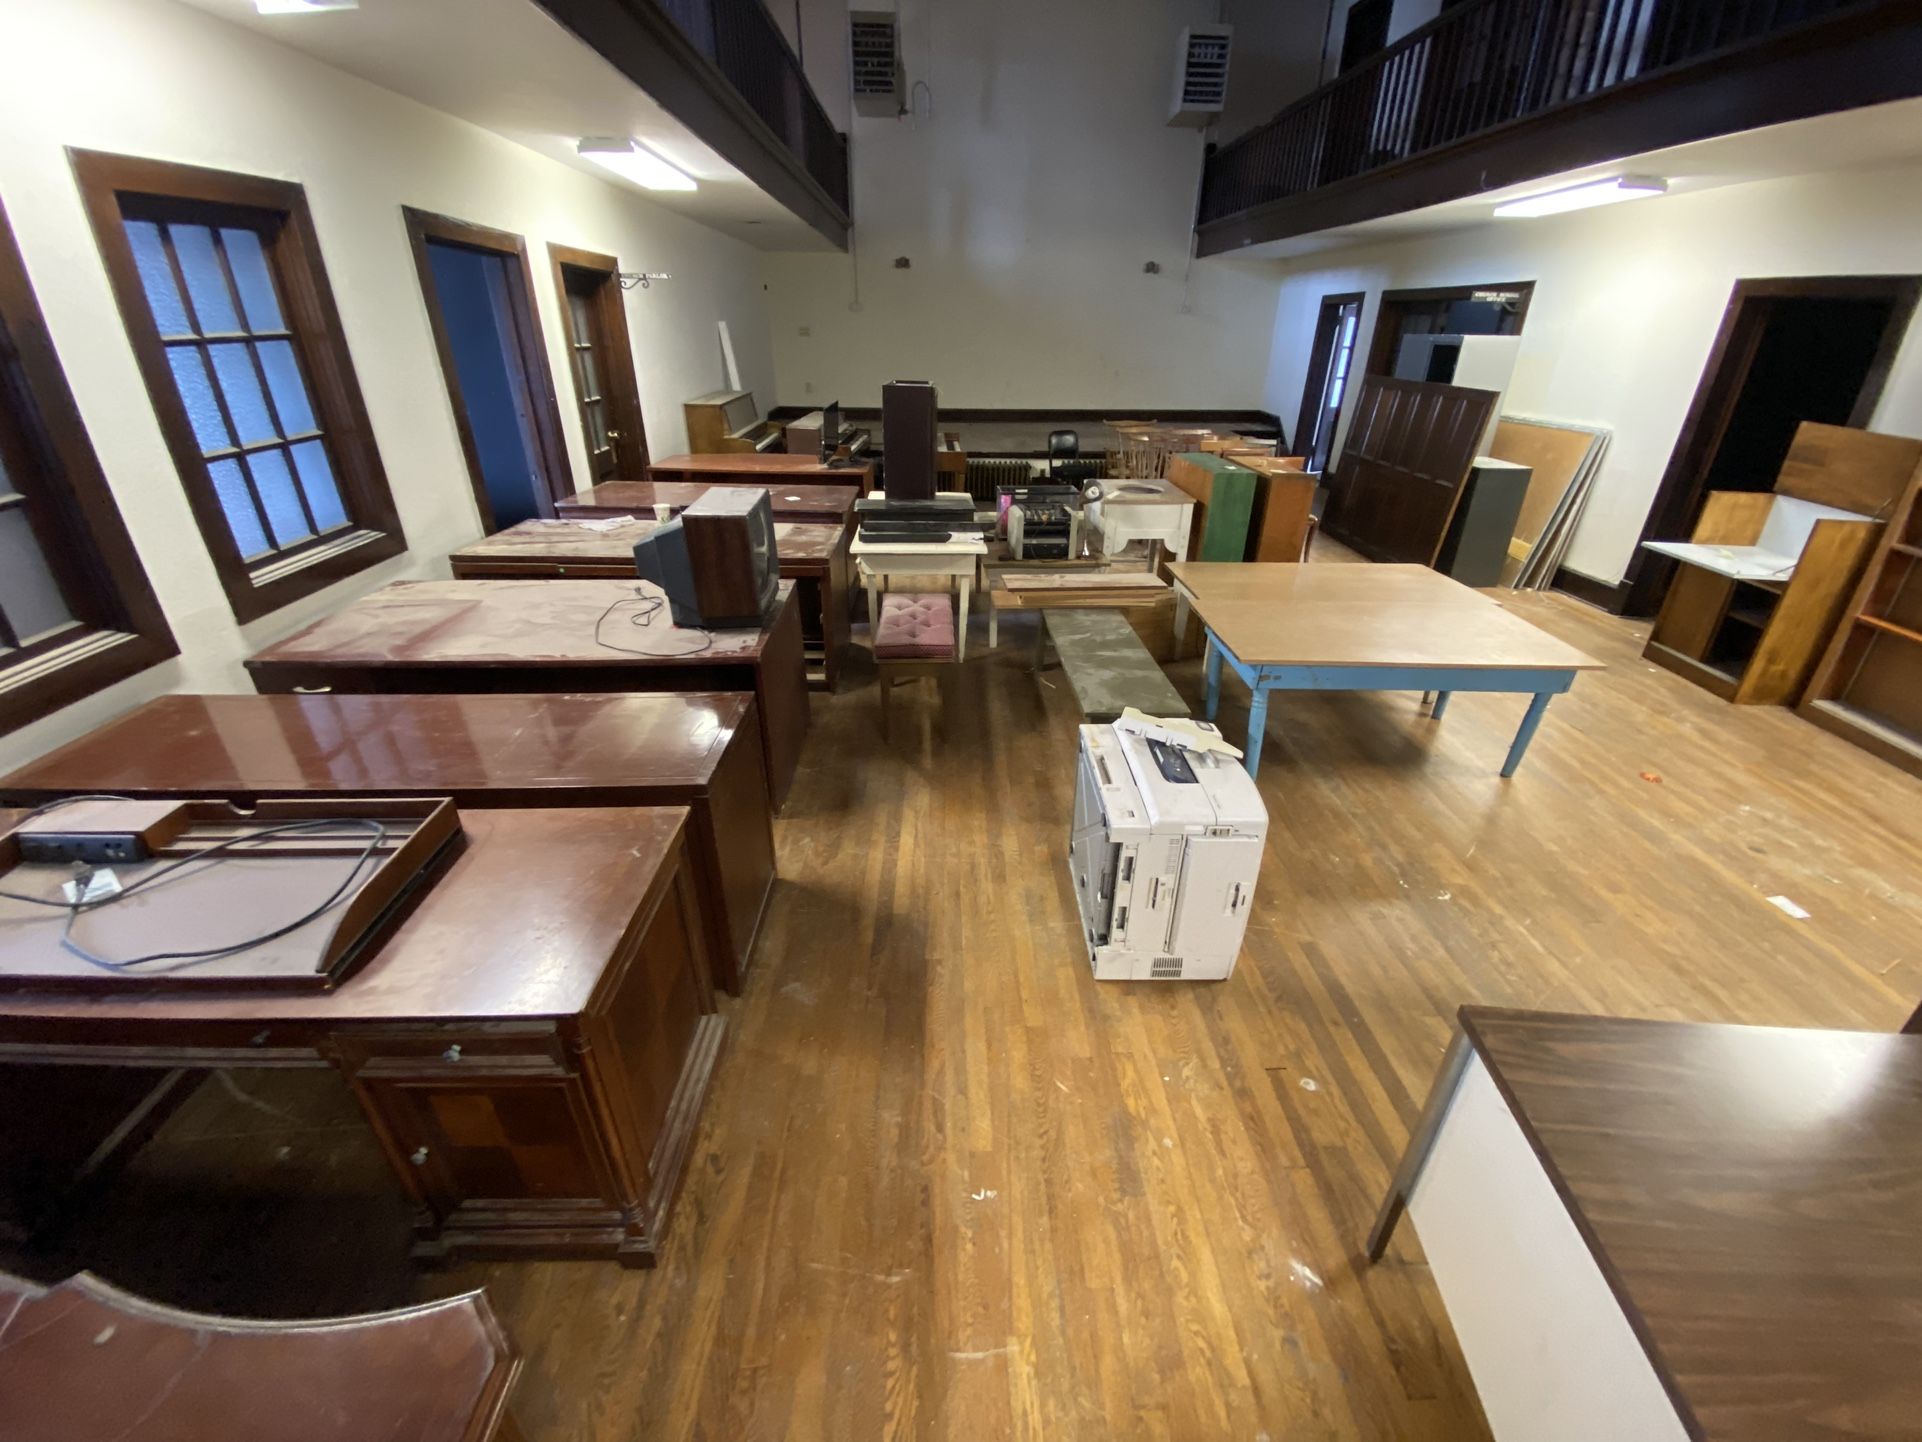 MOVE OUT SALE!! Furniture, chairs, desks, Tables